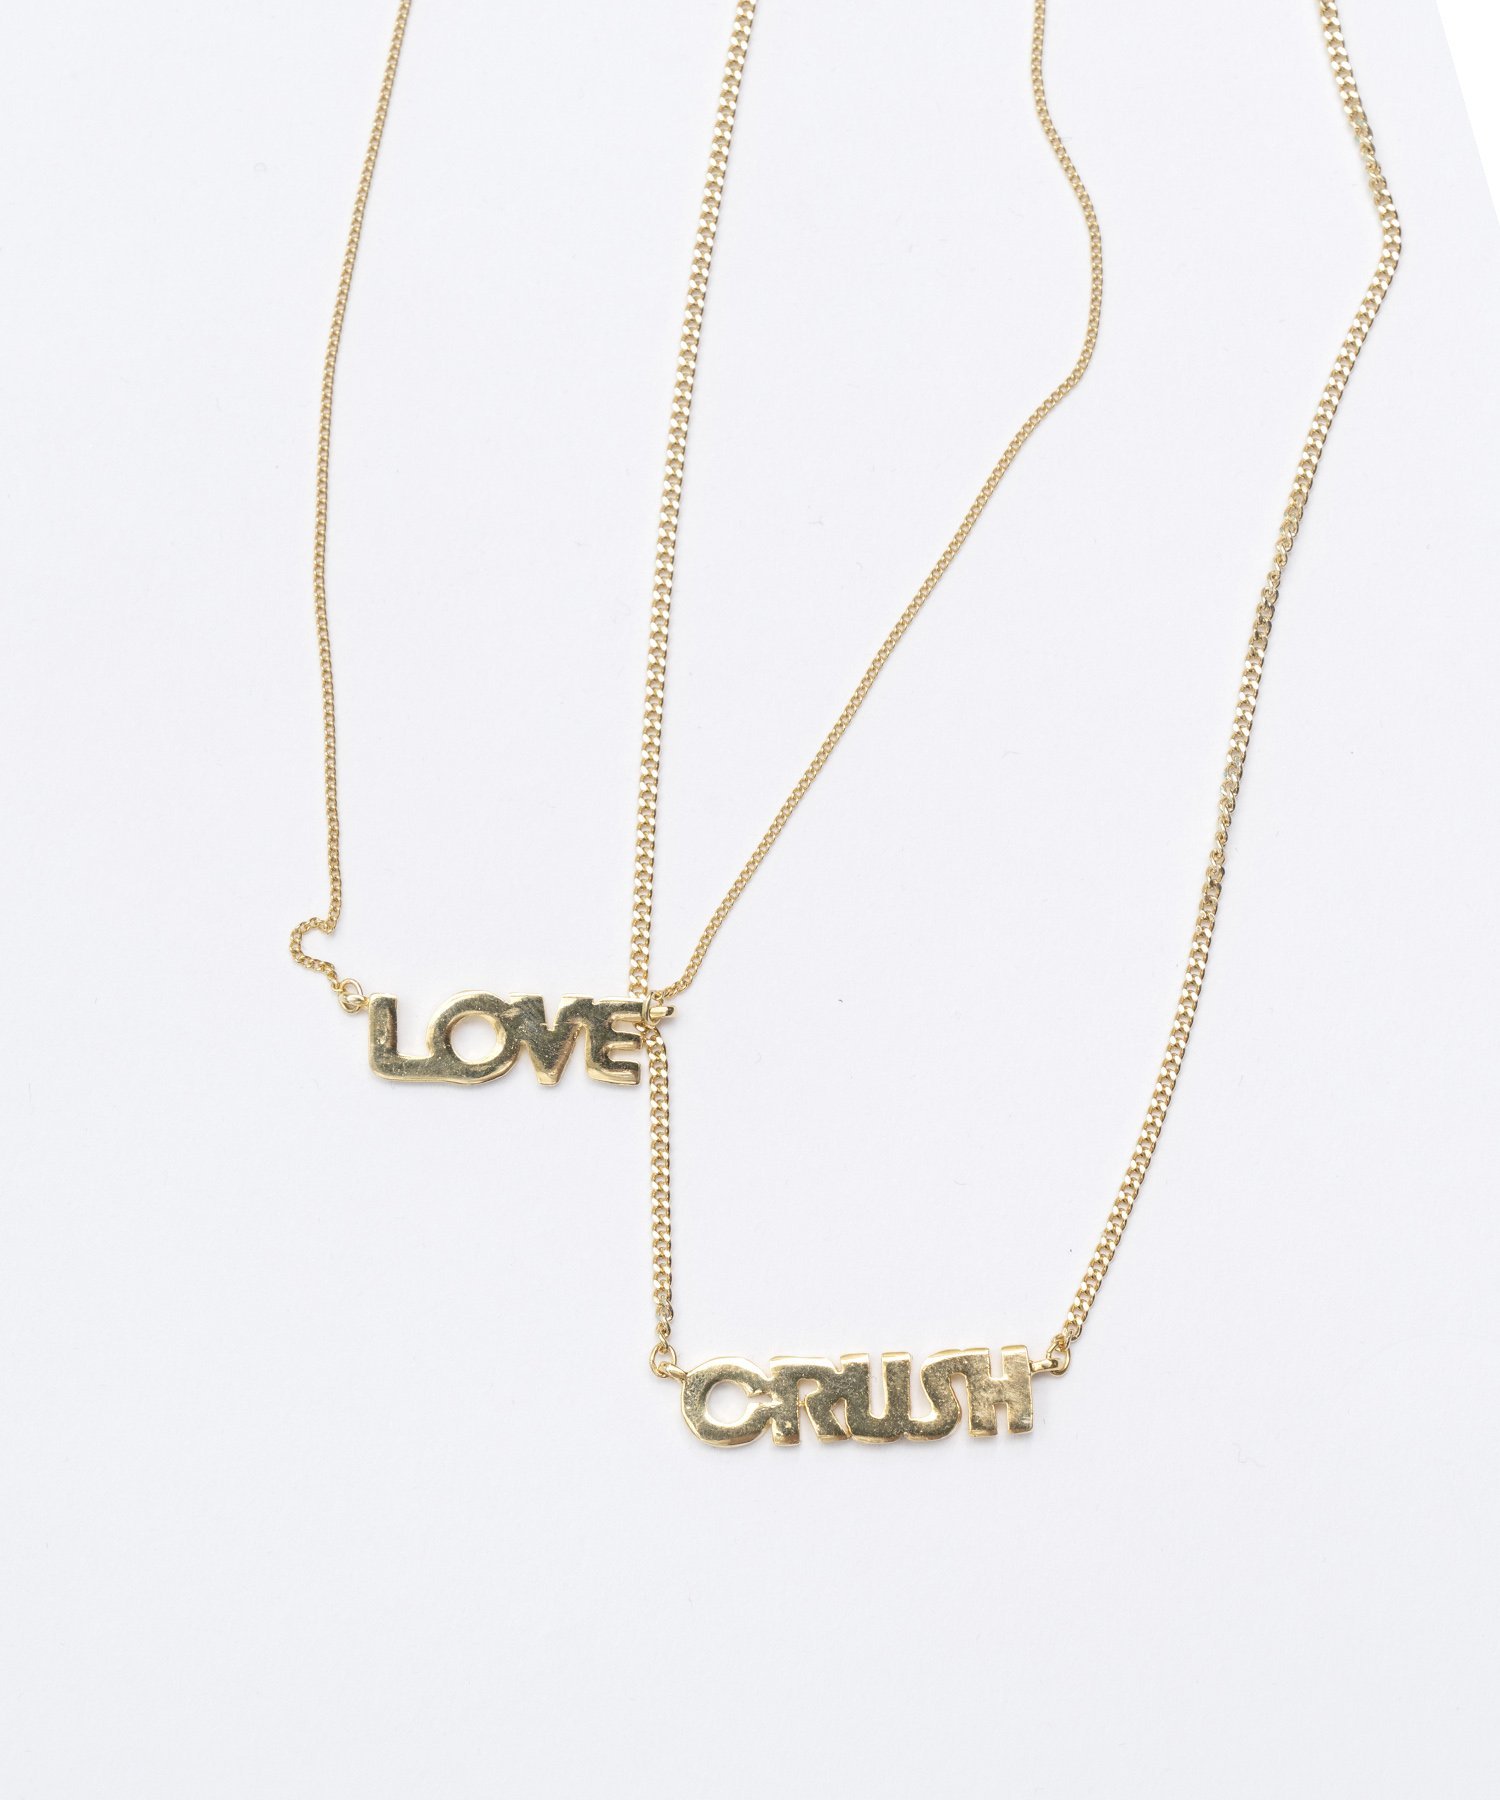 LOVE CRUSH Necklace/LOVE CRUSHネックレス【MAISON SPECIAL/メゾン